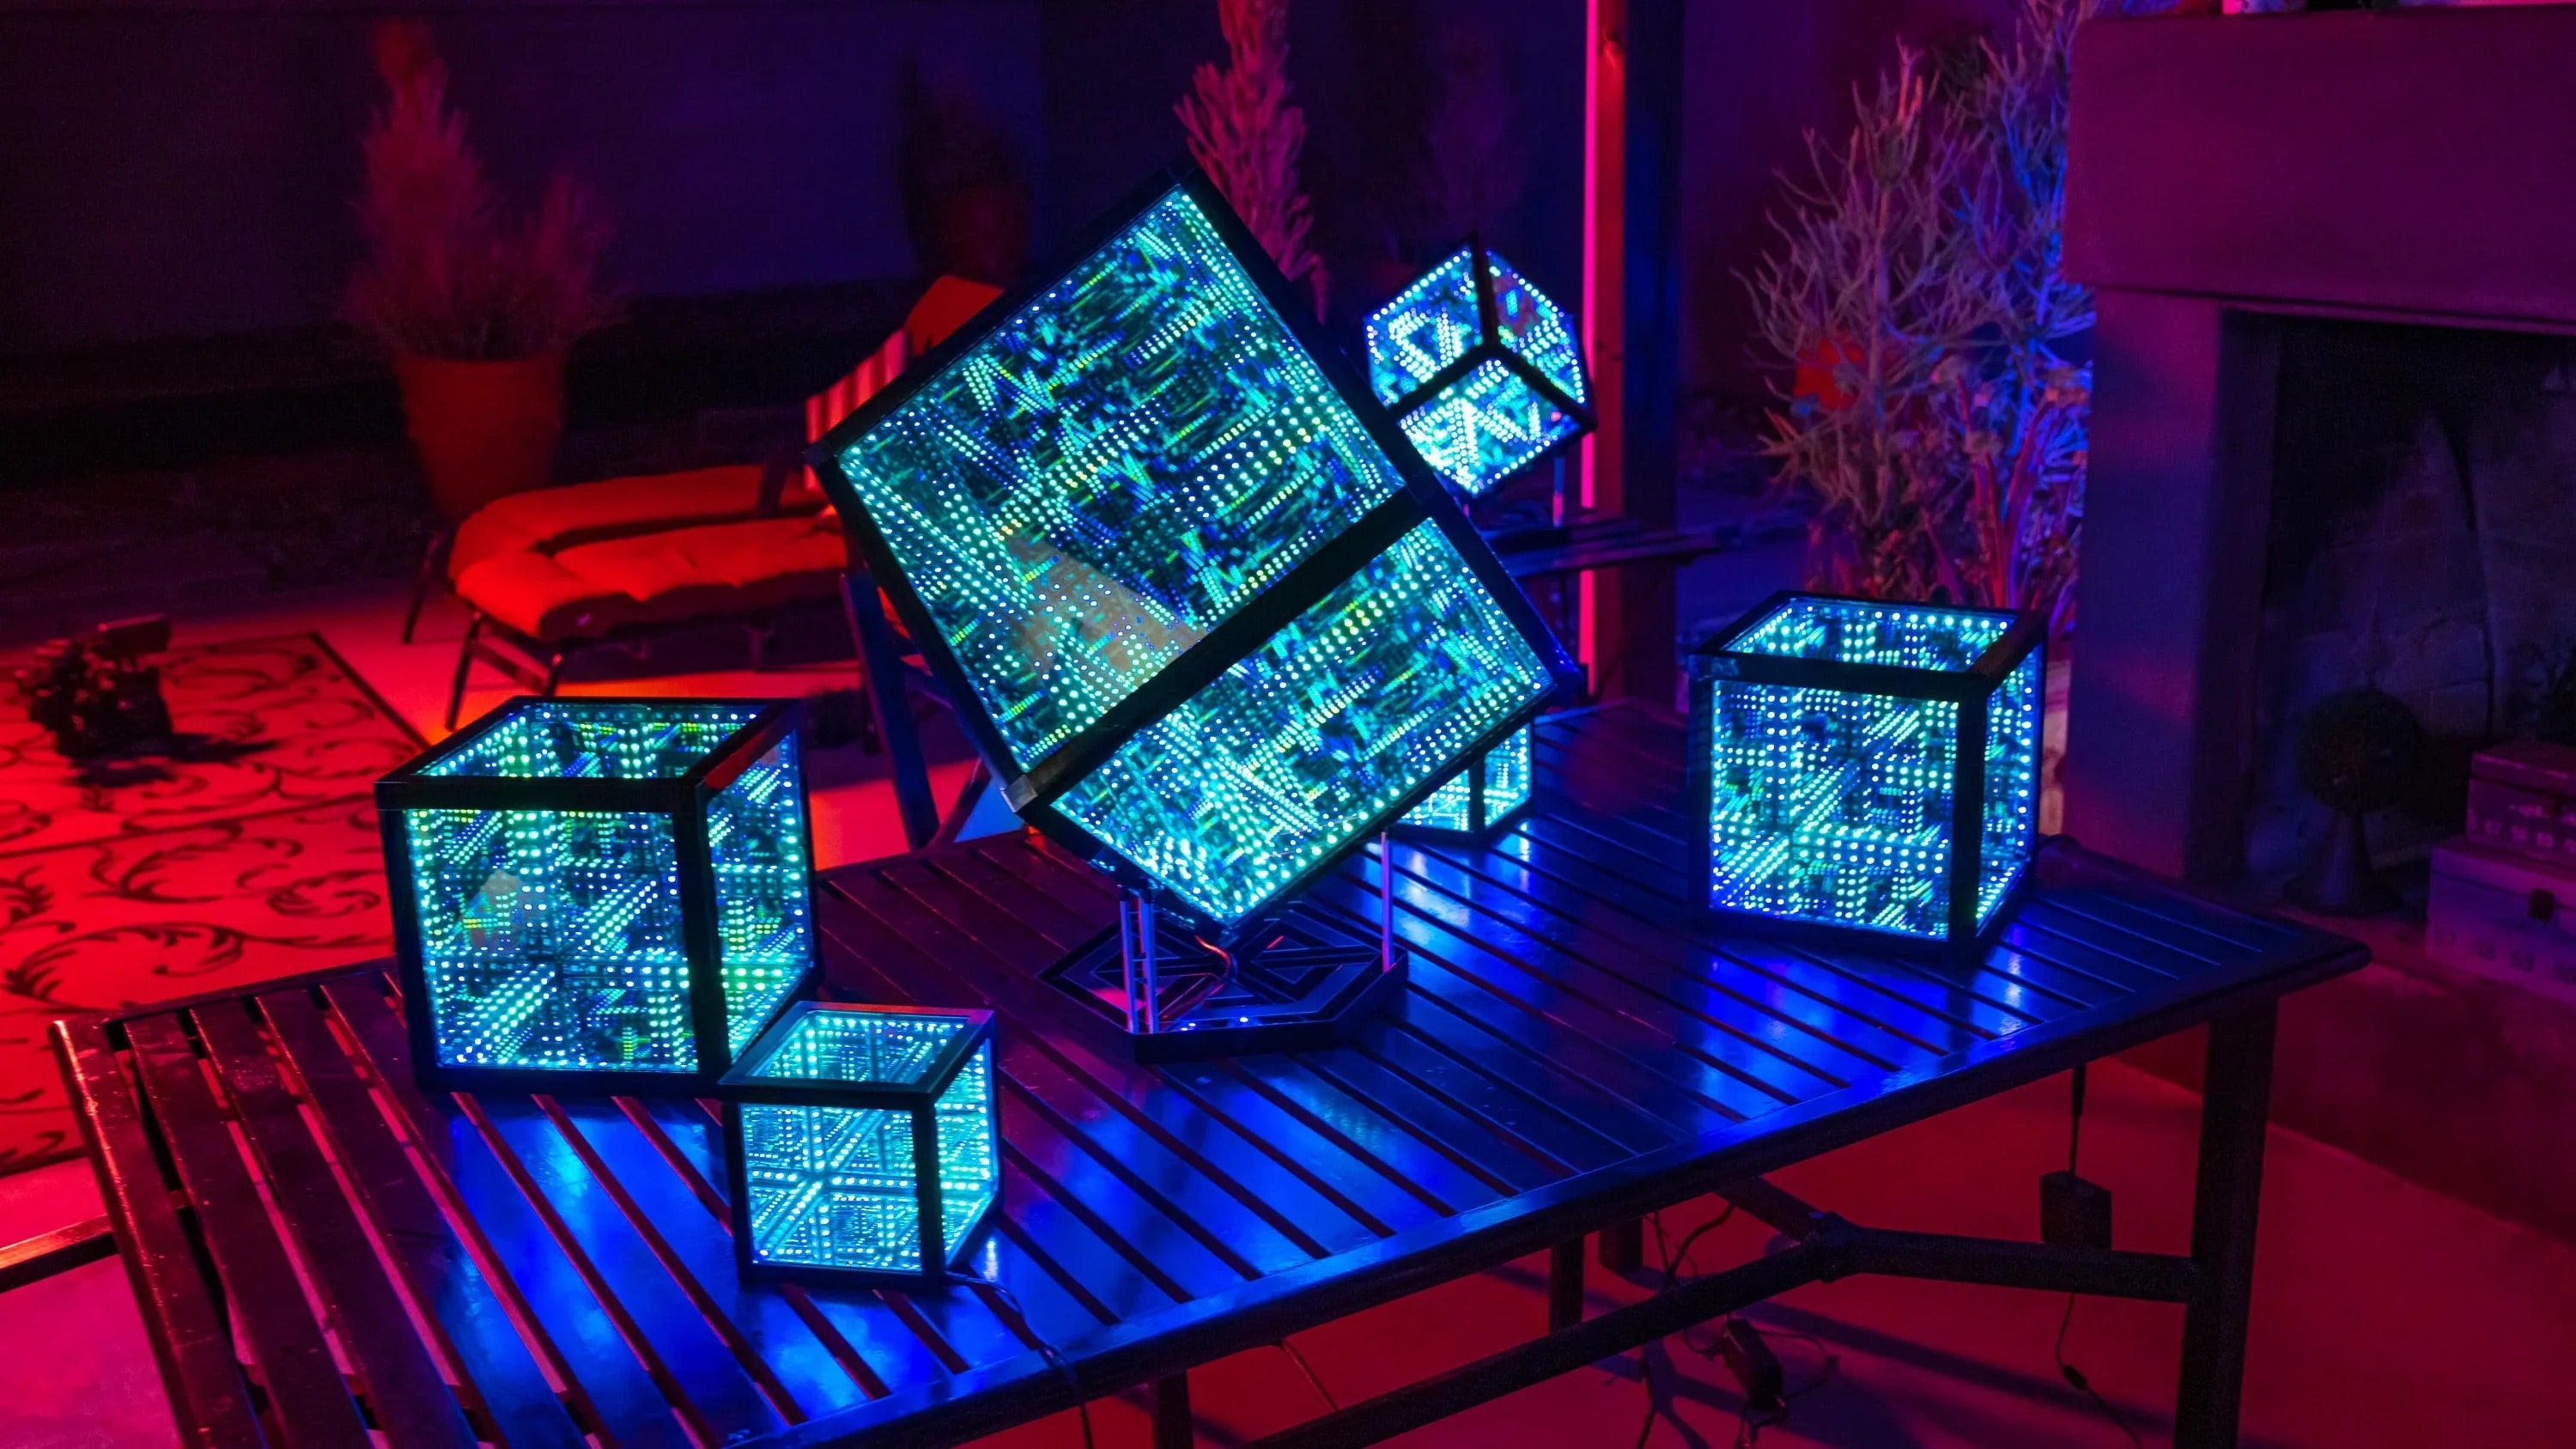 Five HyperCubes on patio table during outdoor party, providing DJ LED lighting